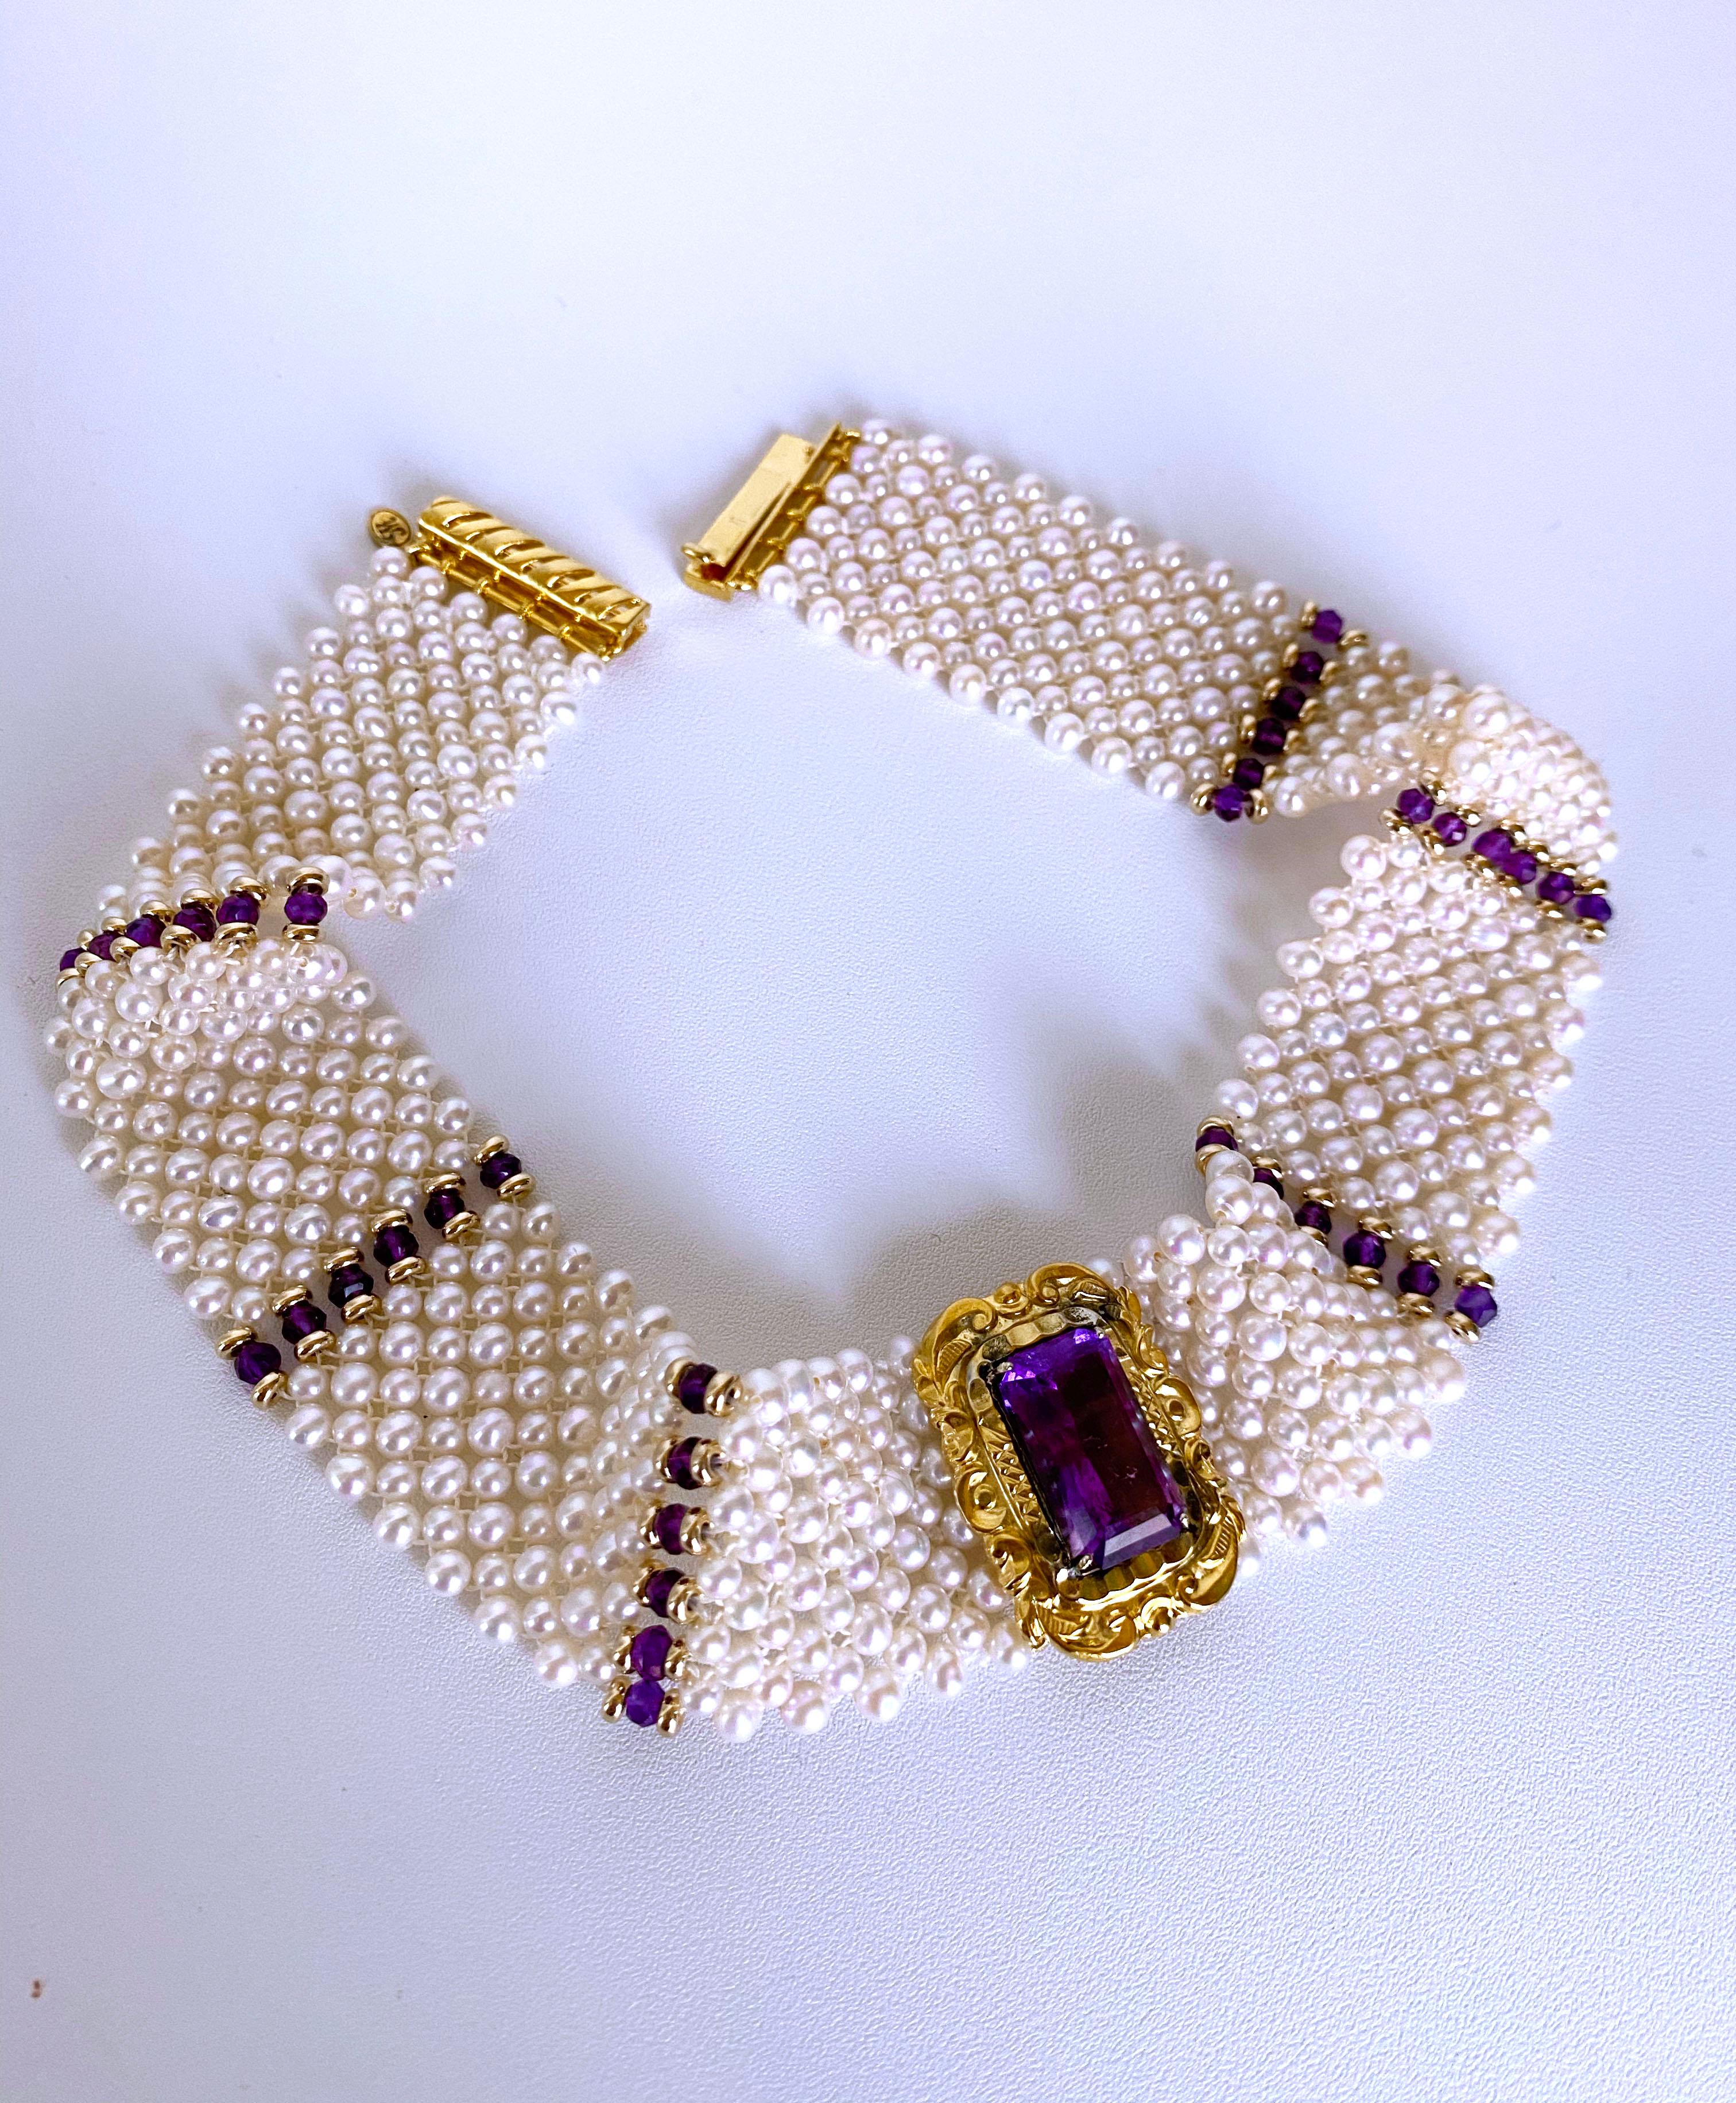 Bead Marina J. Pearl, Amethyst and Vintage Centerpiece Choker with 14k Yellow Gold